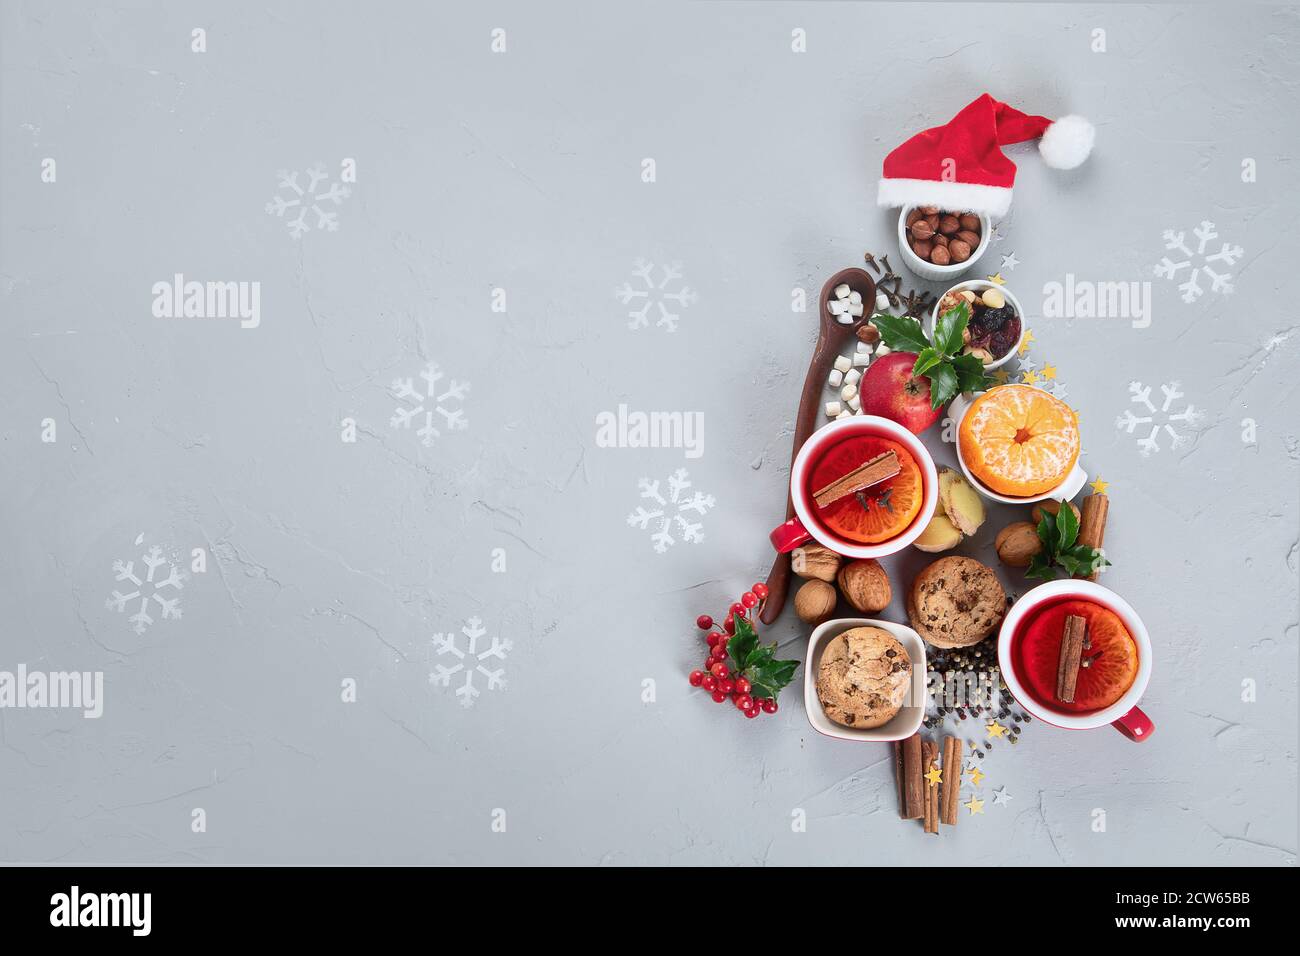 Christmas Tree made of holiday food on concrete background. Top view, flat lay  with copy space. Christmas concept. New Year Holidays background. Stock Photo